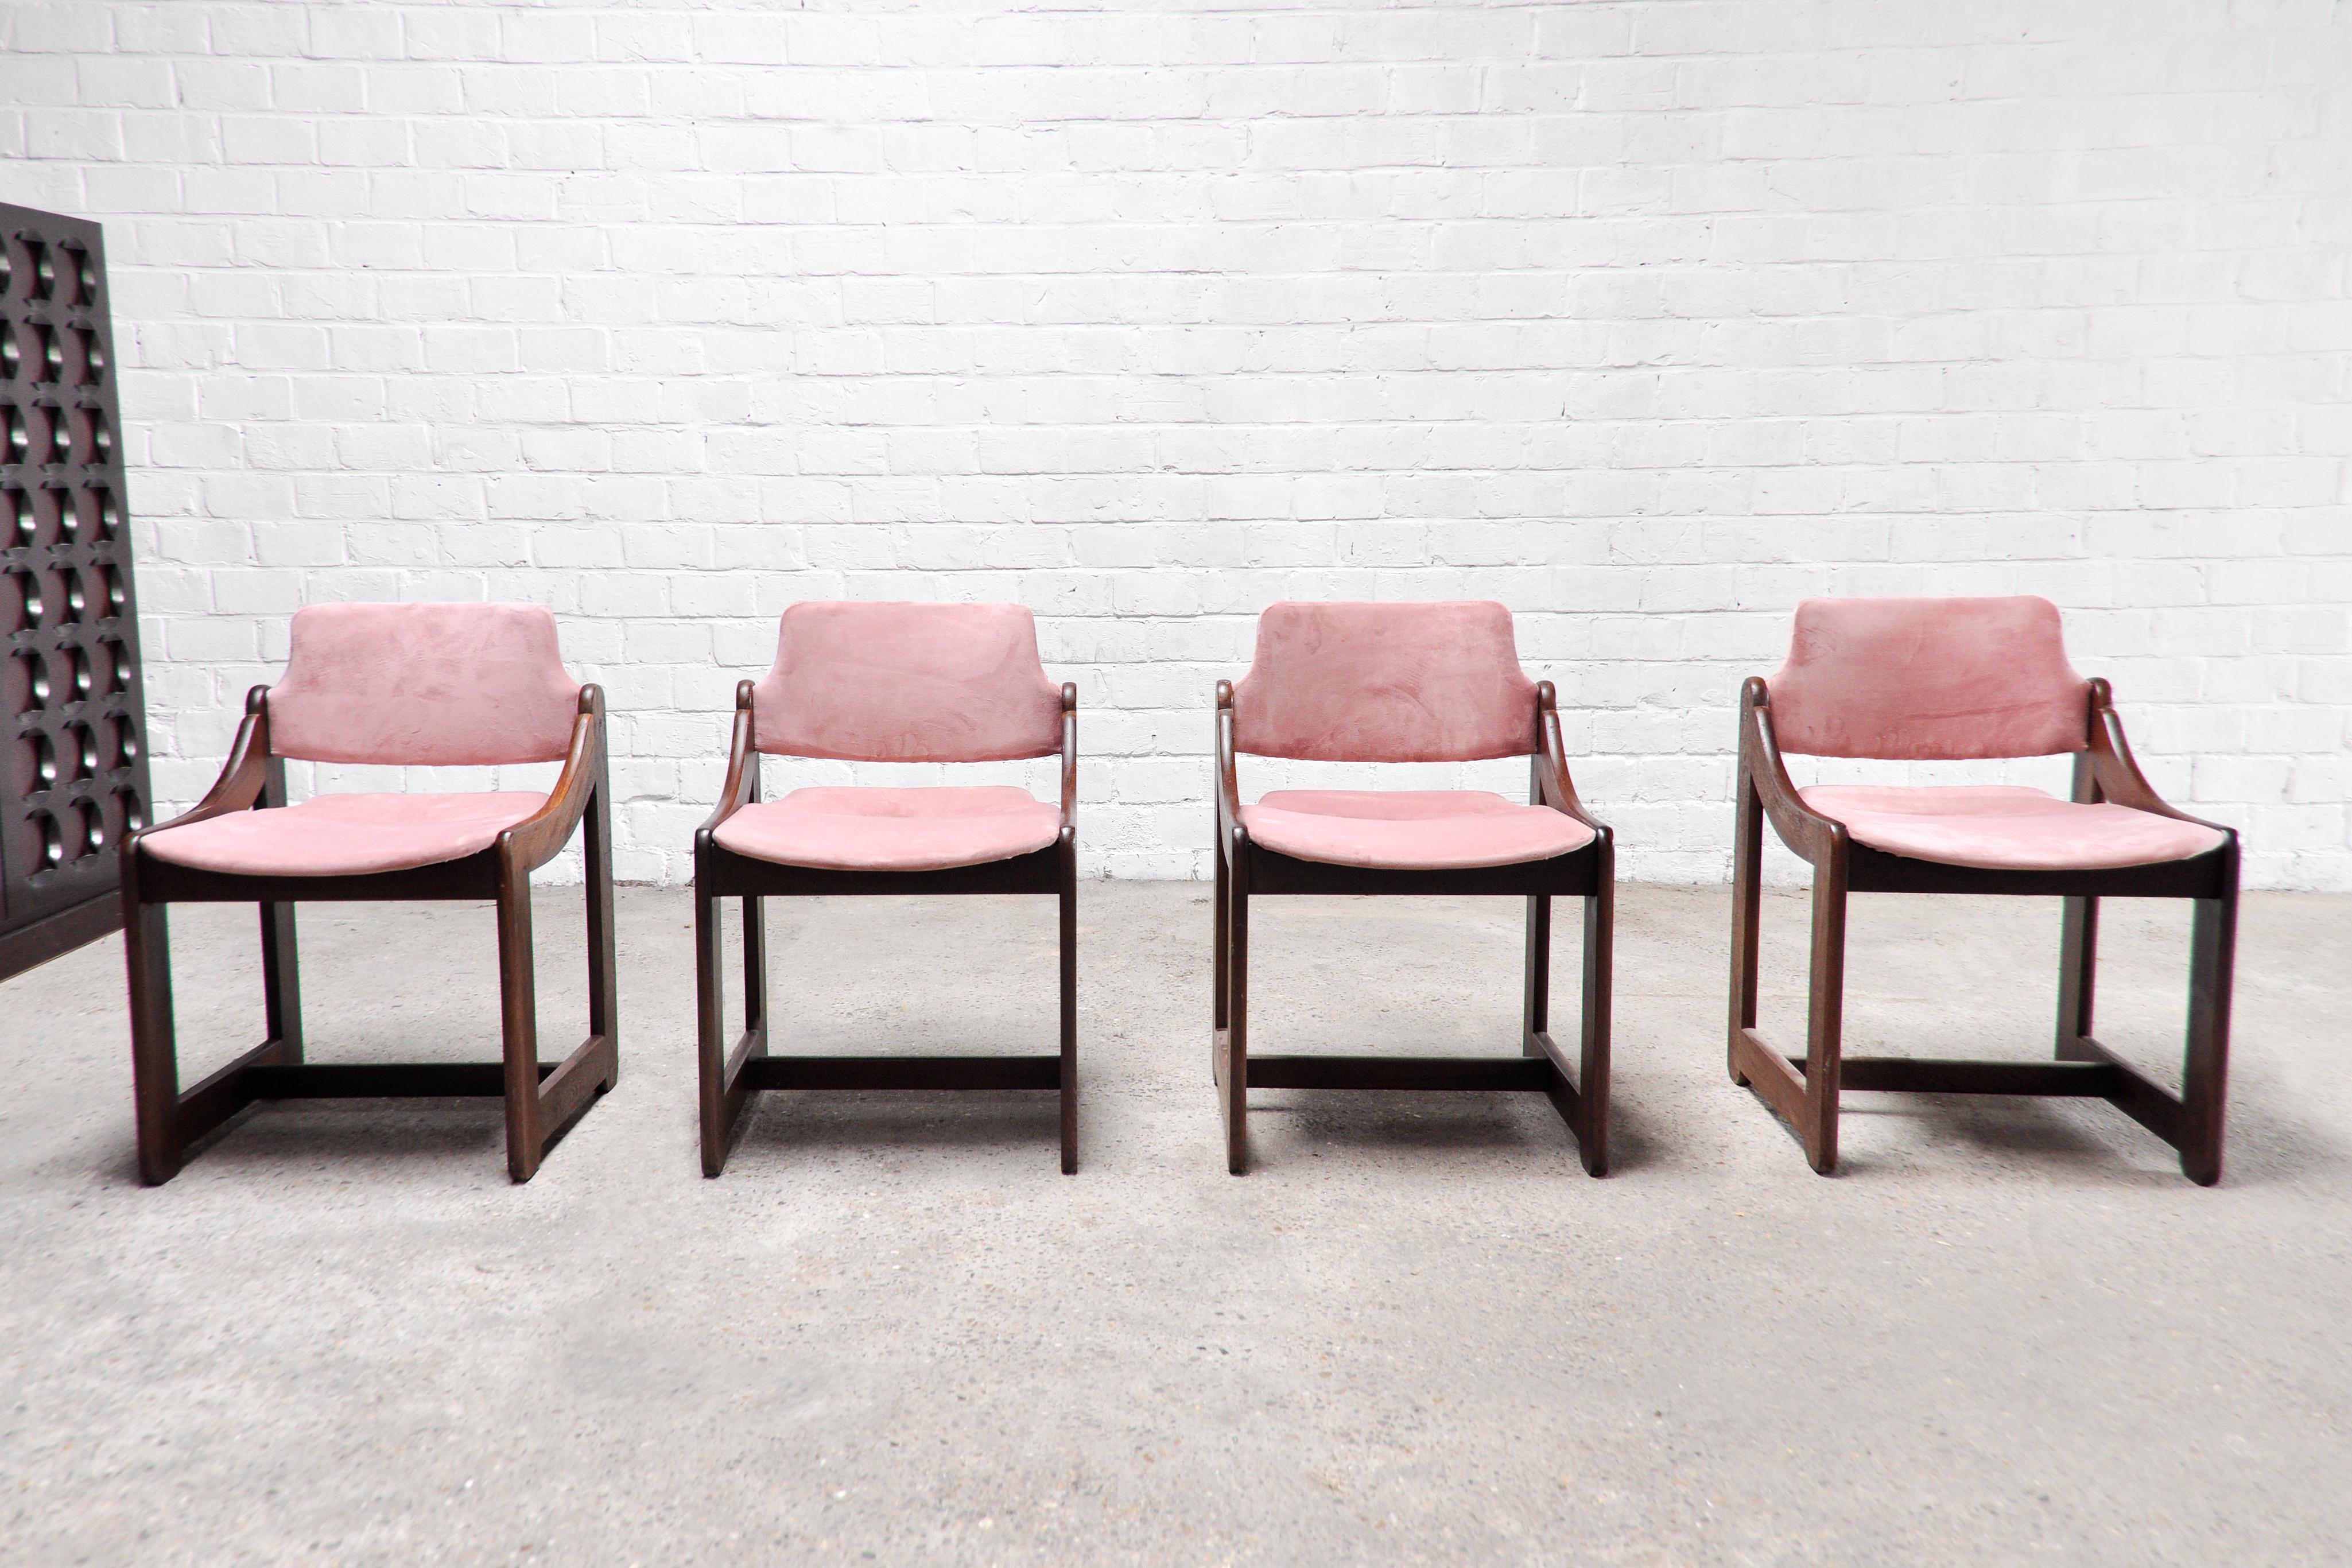 Beautiful set of four solid wengé wood italian dining chairs, 1960's. The elegant shaped wooden frame is warm in colour and conveys the spirit of 60's Modernism and  Mid-century design. The comfortable seats have been newly upholstered in a soft